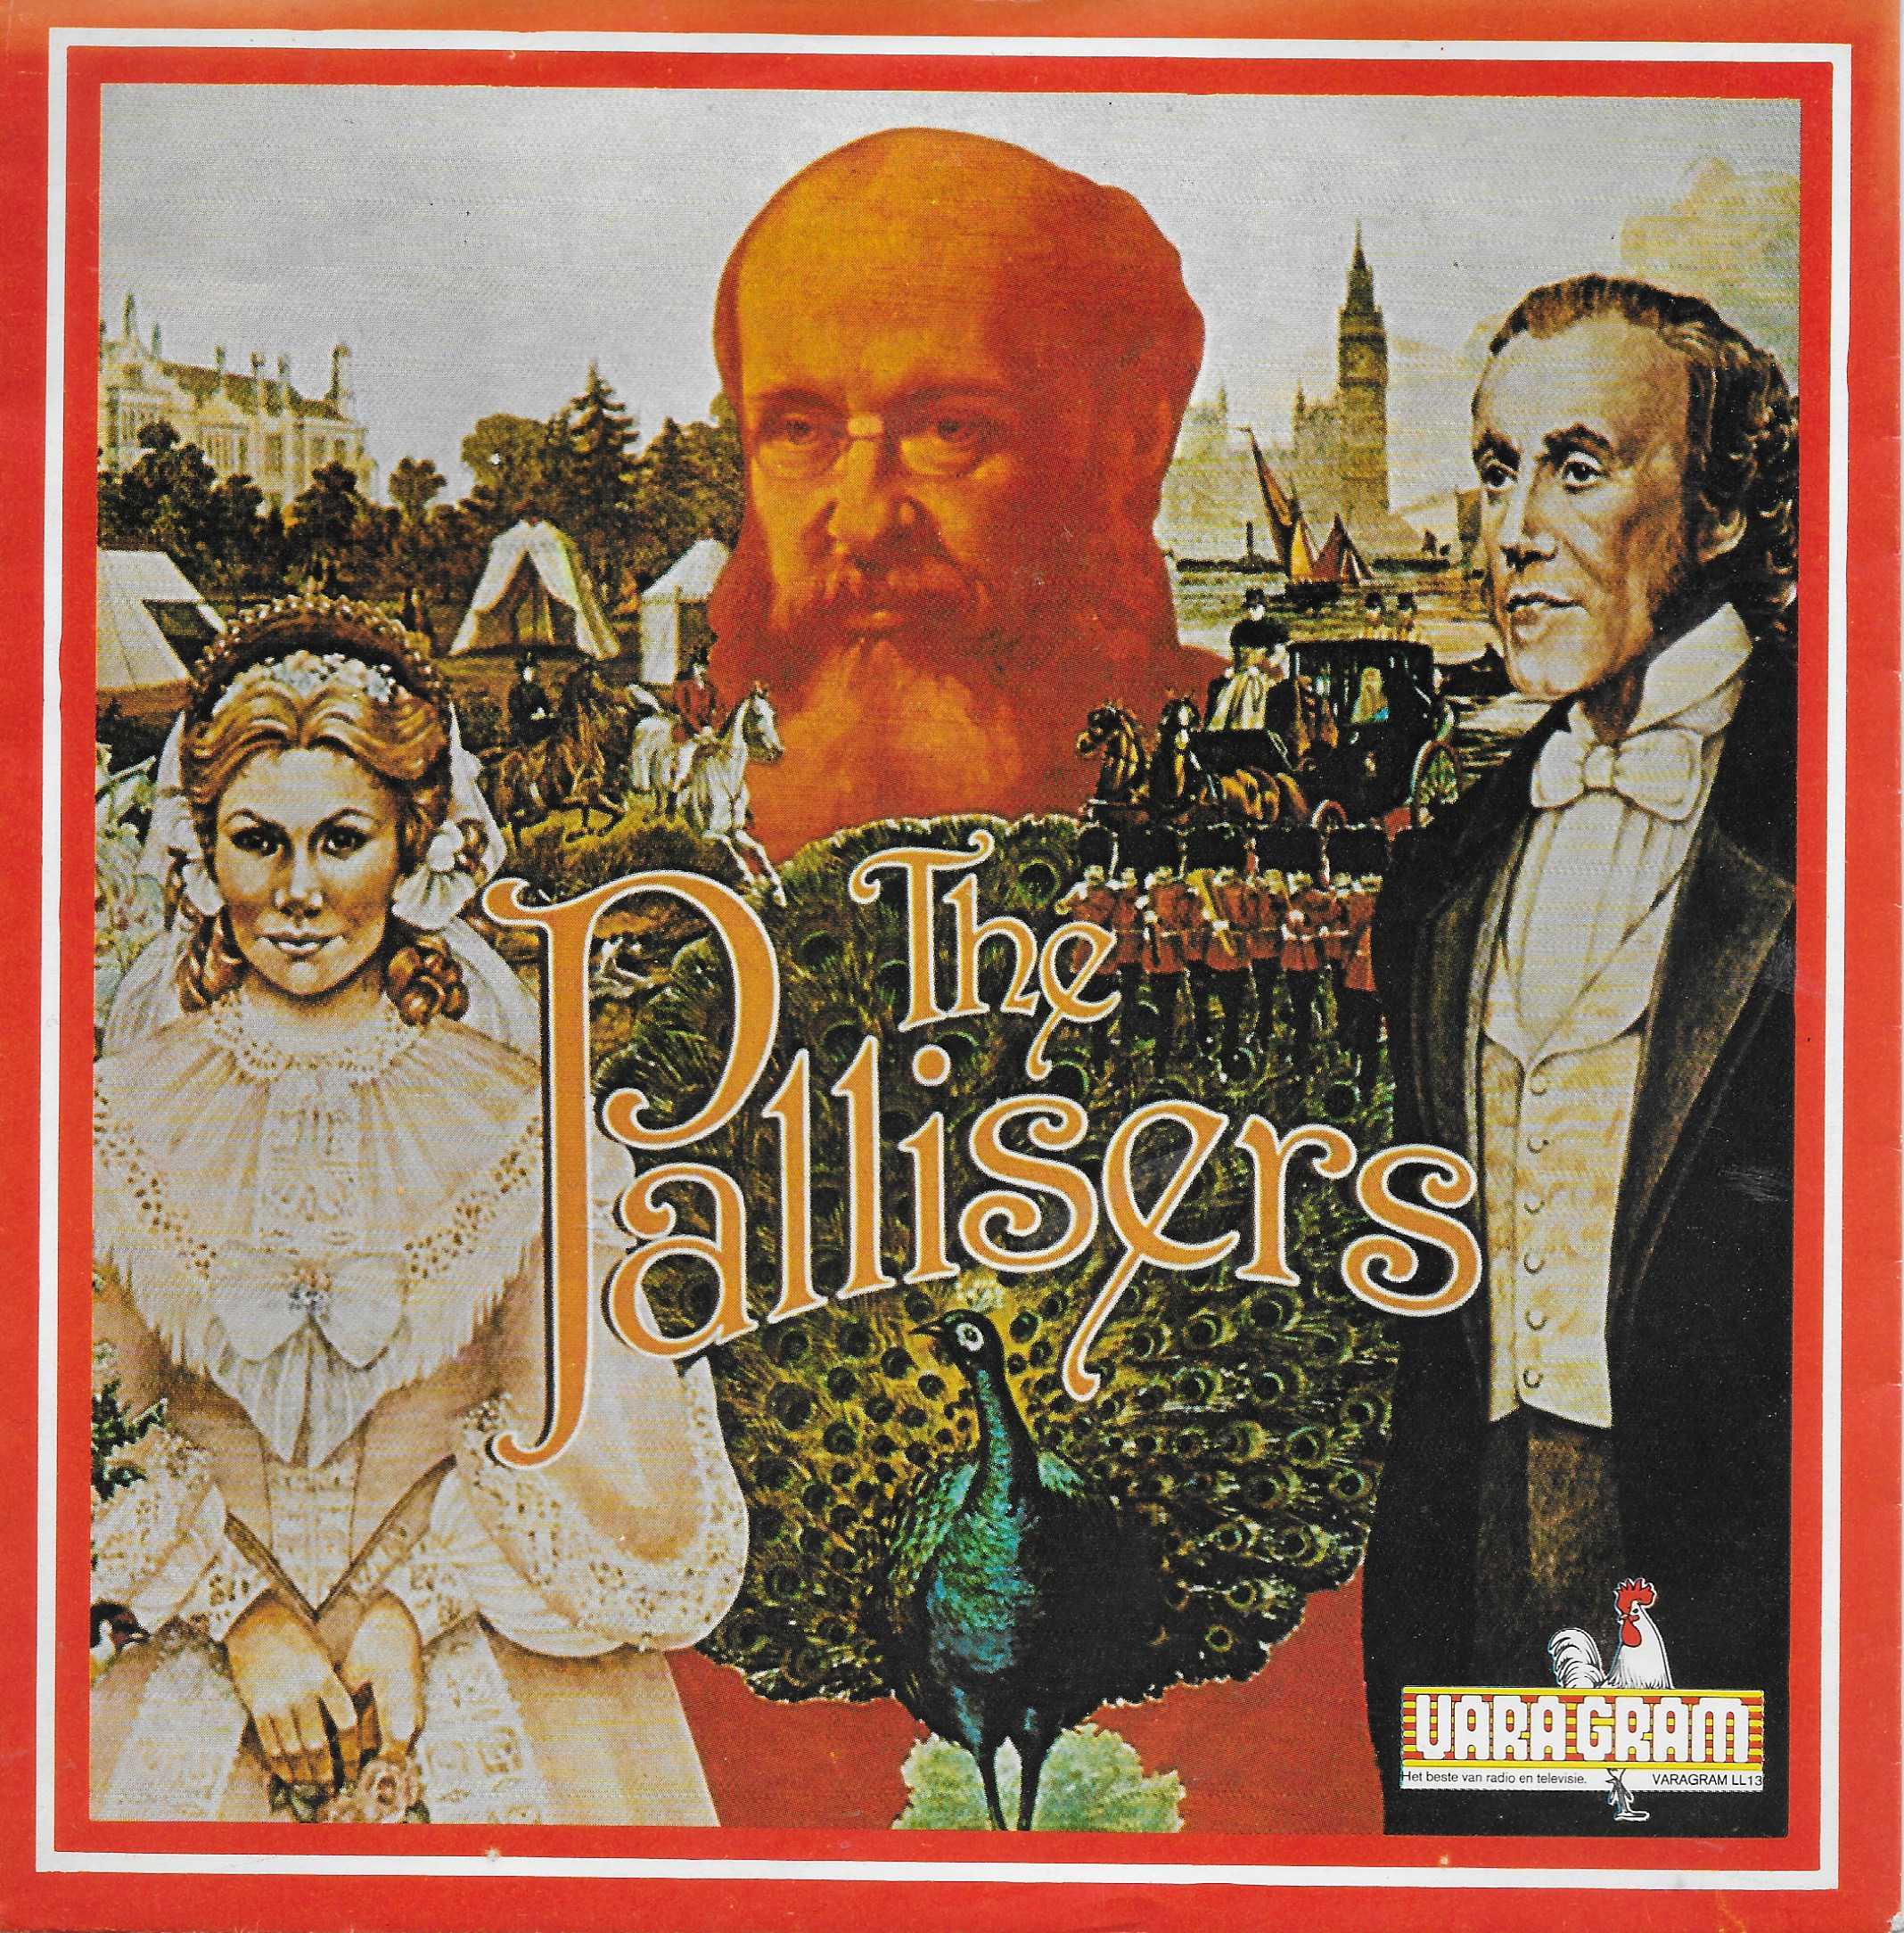 Picture of The Pallisers by artist Herbert Chappell from the BBC singles - Records and Tapes library